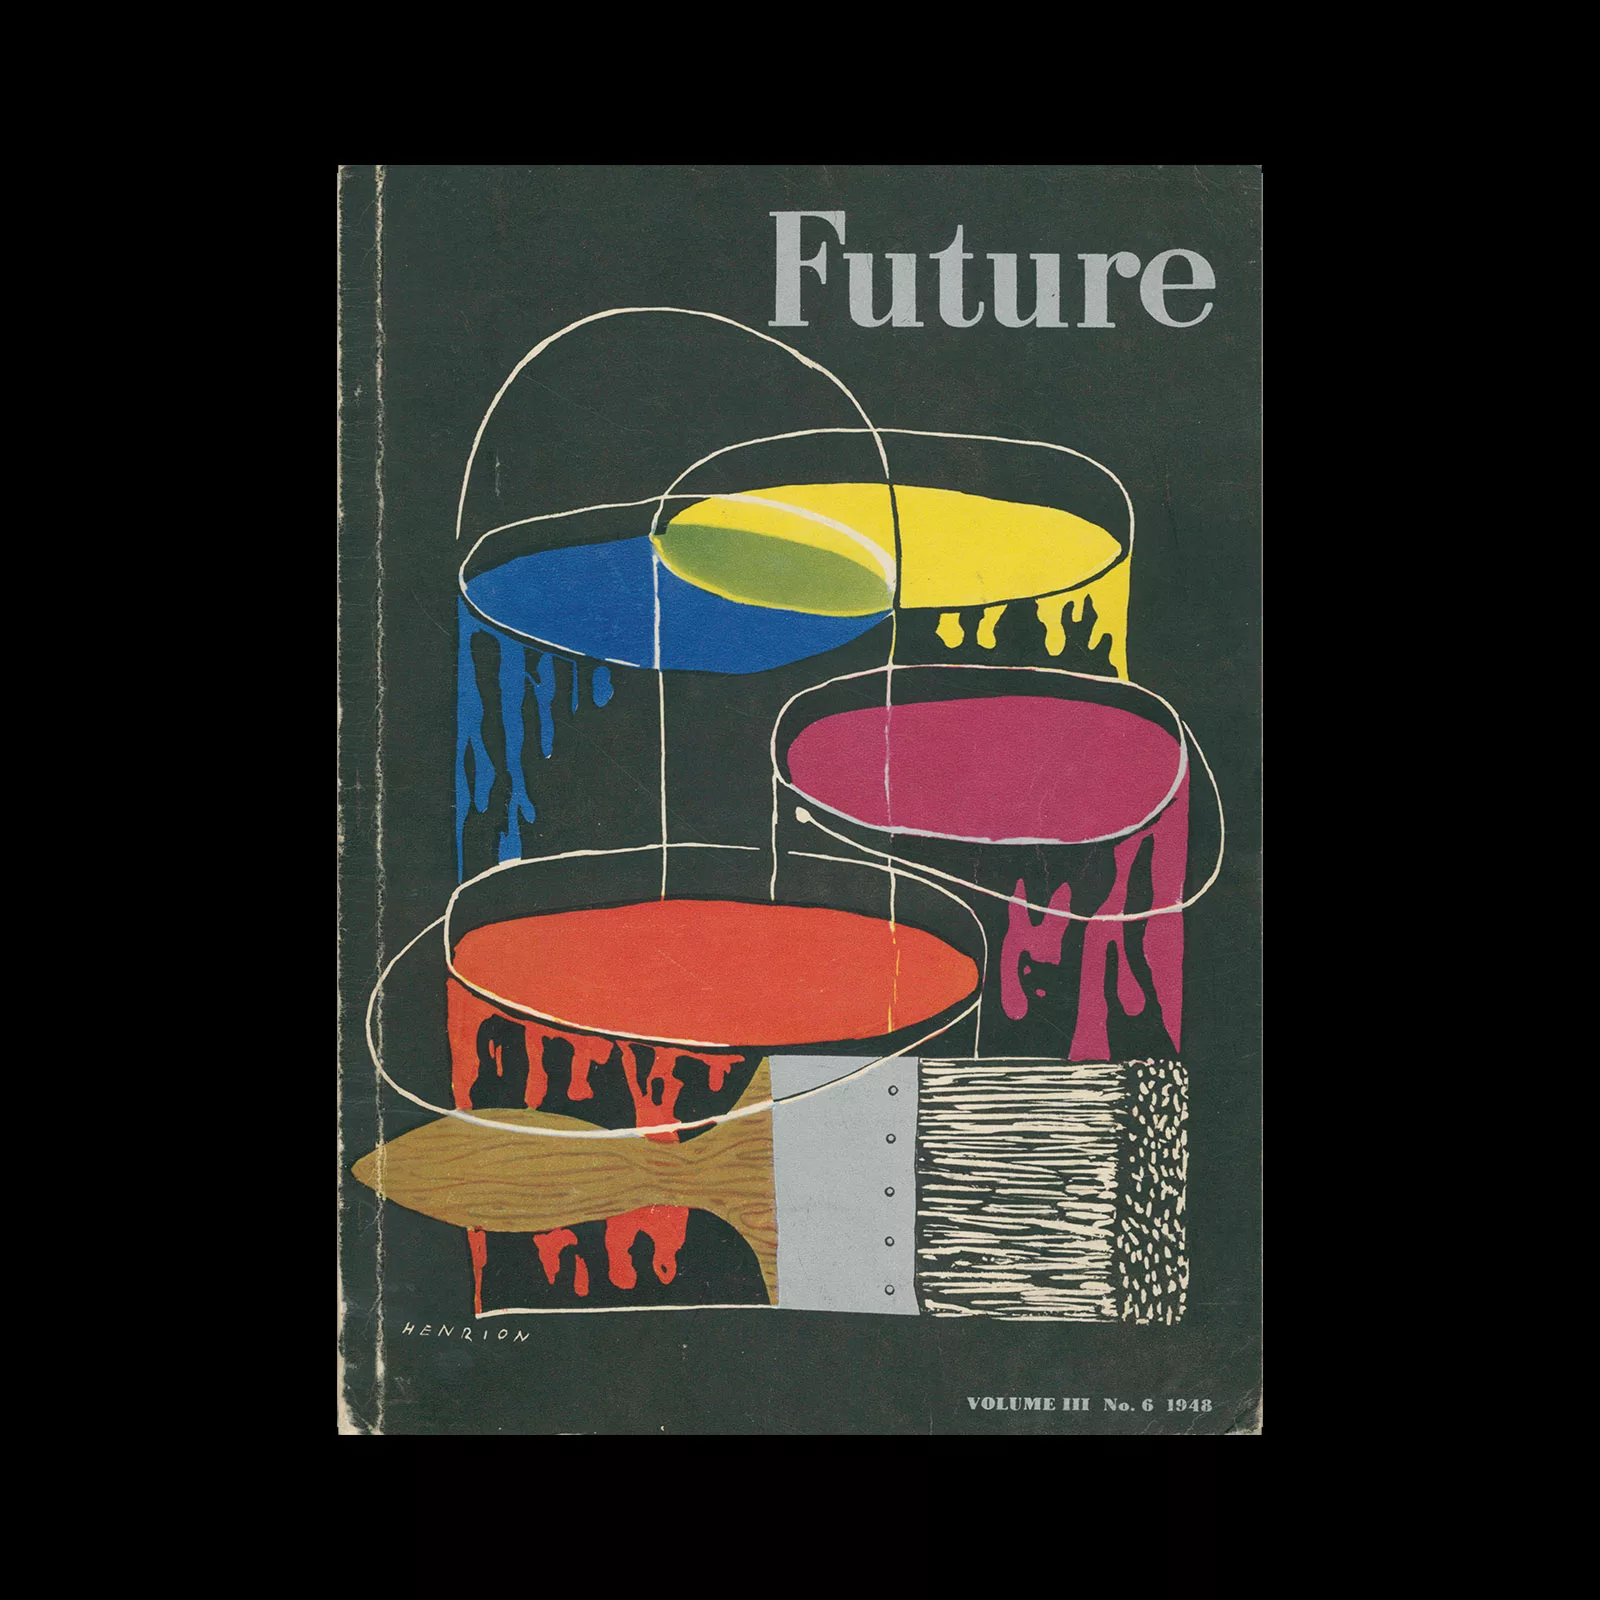 Future Books Volume 6 - Overture, Industry Government Science Arts, 1948. Cover design by FHK Henrion